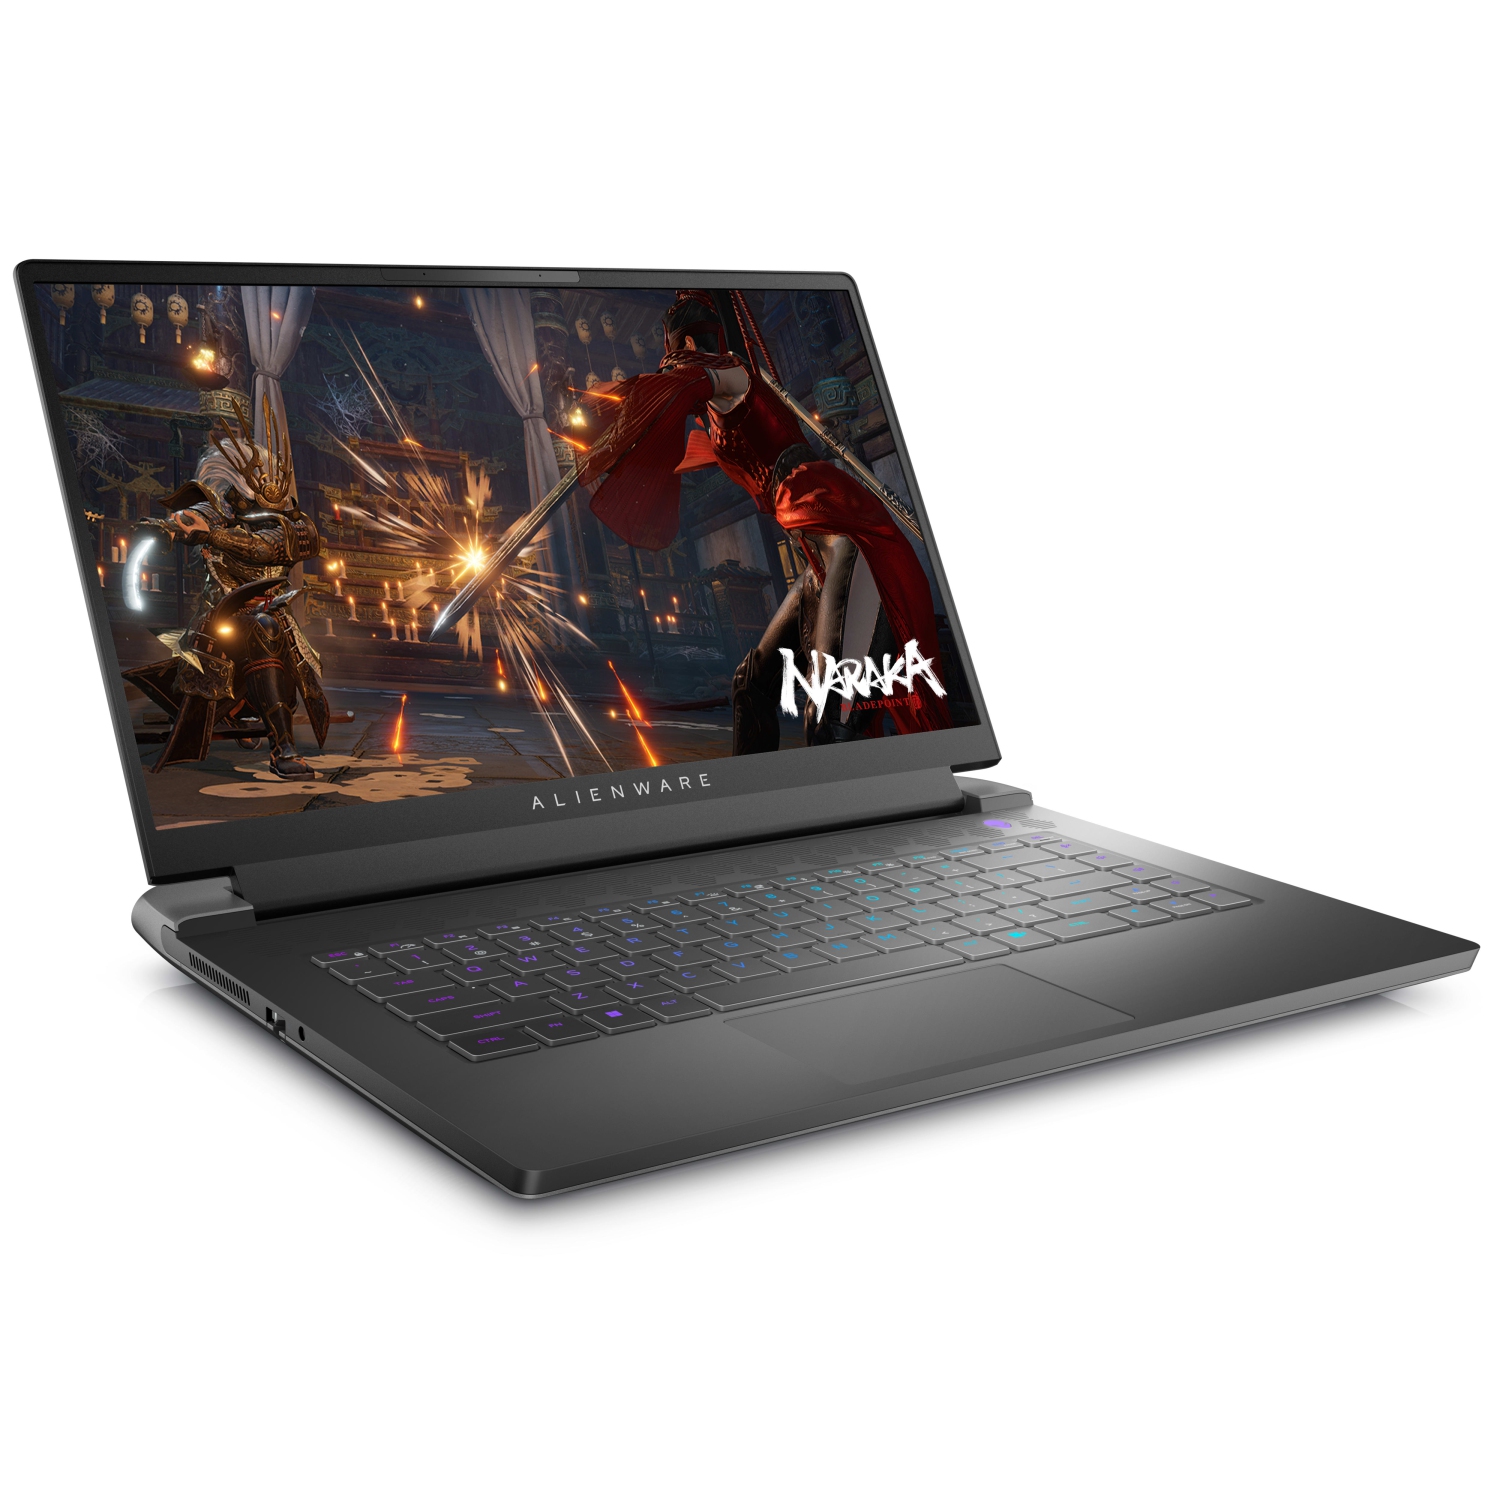 Refurbished (Excellent) – Dell Alienware m15 R7 Gaming Laptop (2022) | 15.6" FHD | Core i9 - 1TB SSD - 16GB RAM - RTX 3080 | 14 Cores @ 5 GHz - 12th Gen CPU - 8GB GDDR6X